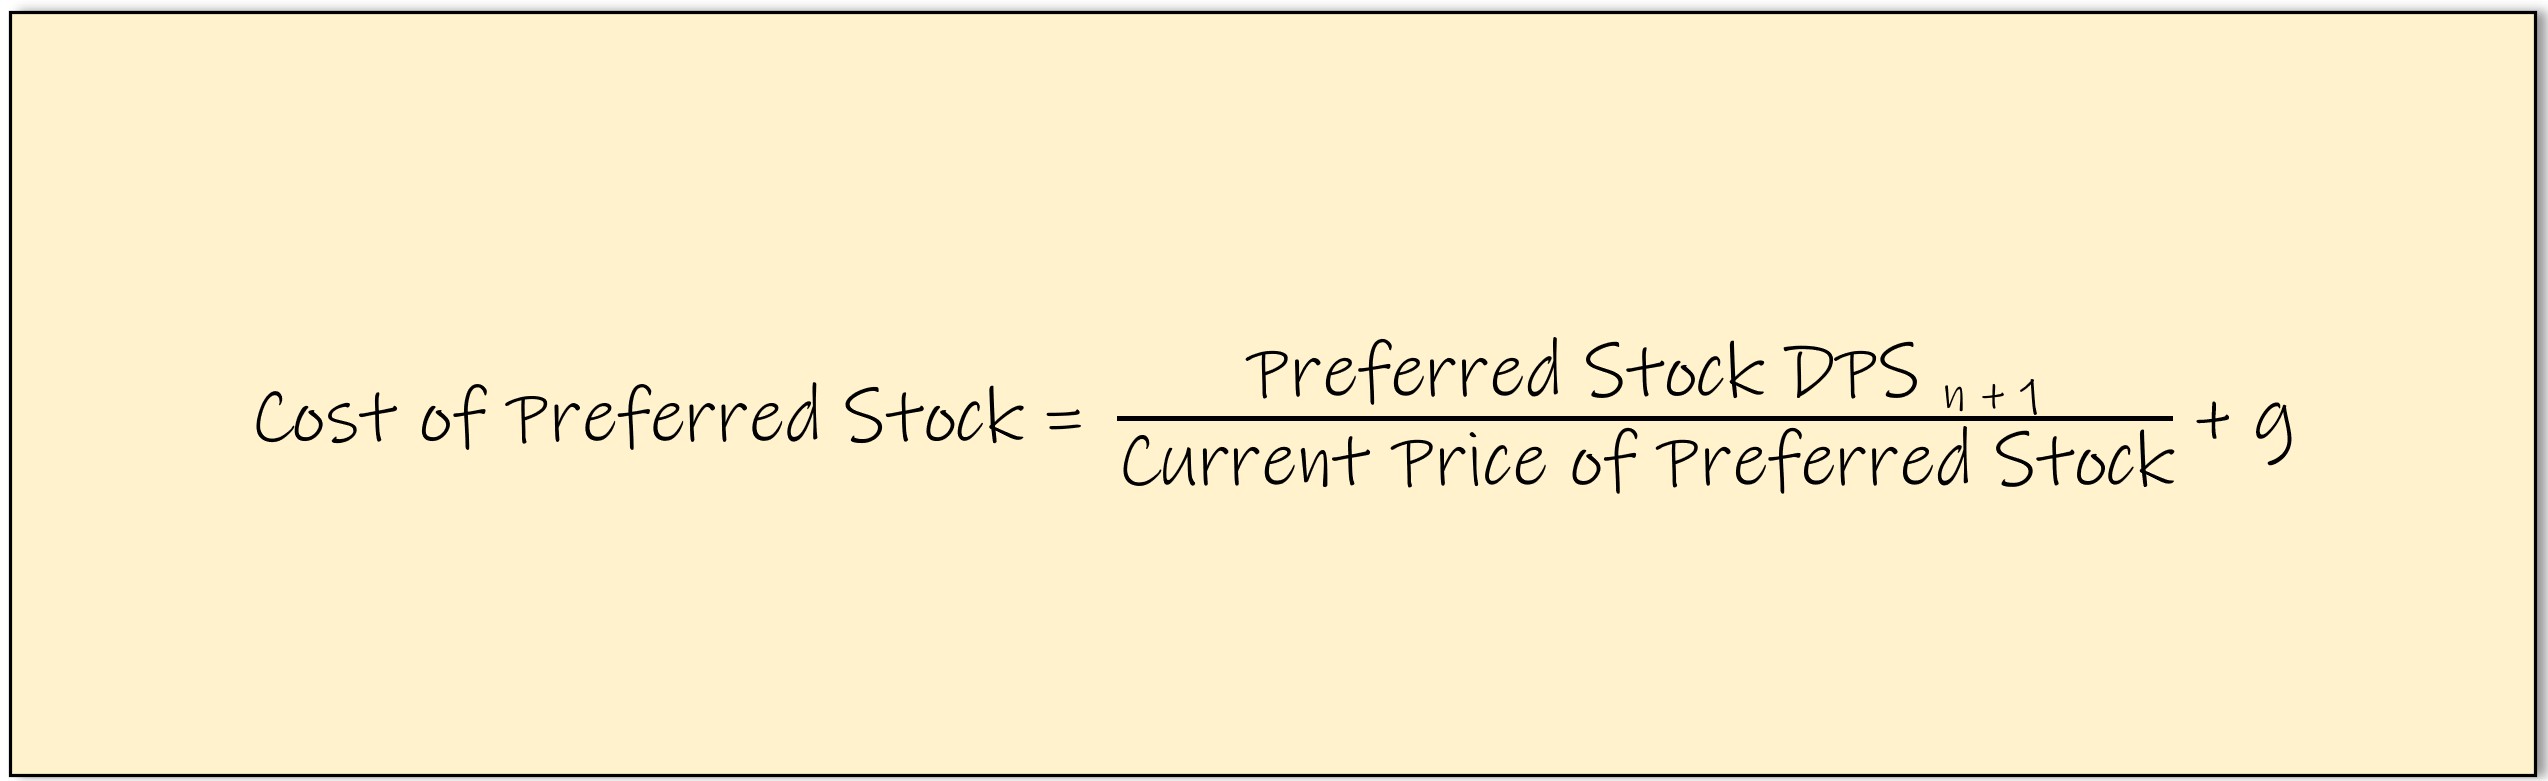 Cost of Preferred Stock Growth Formula